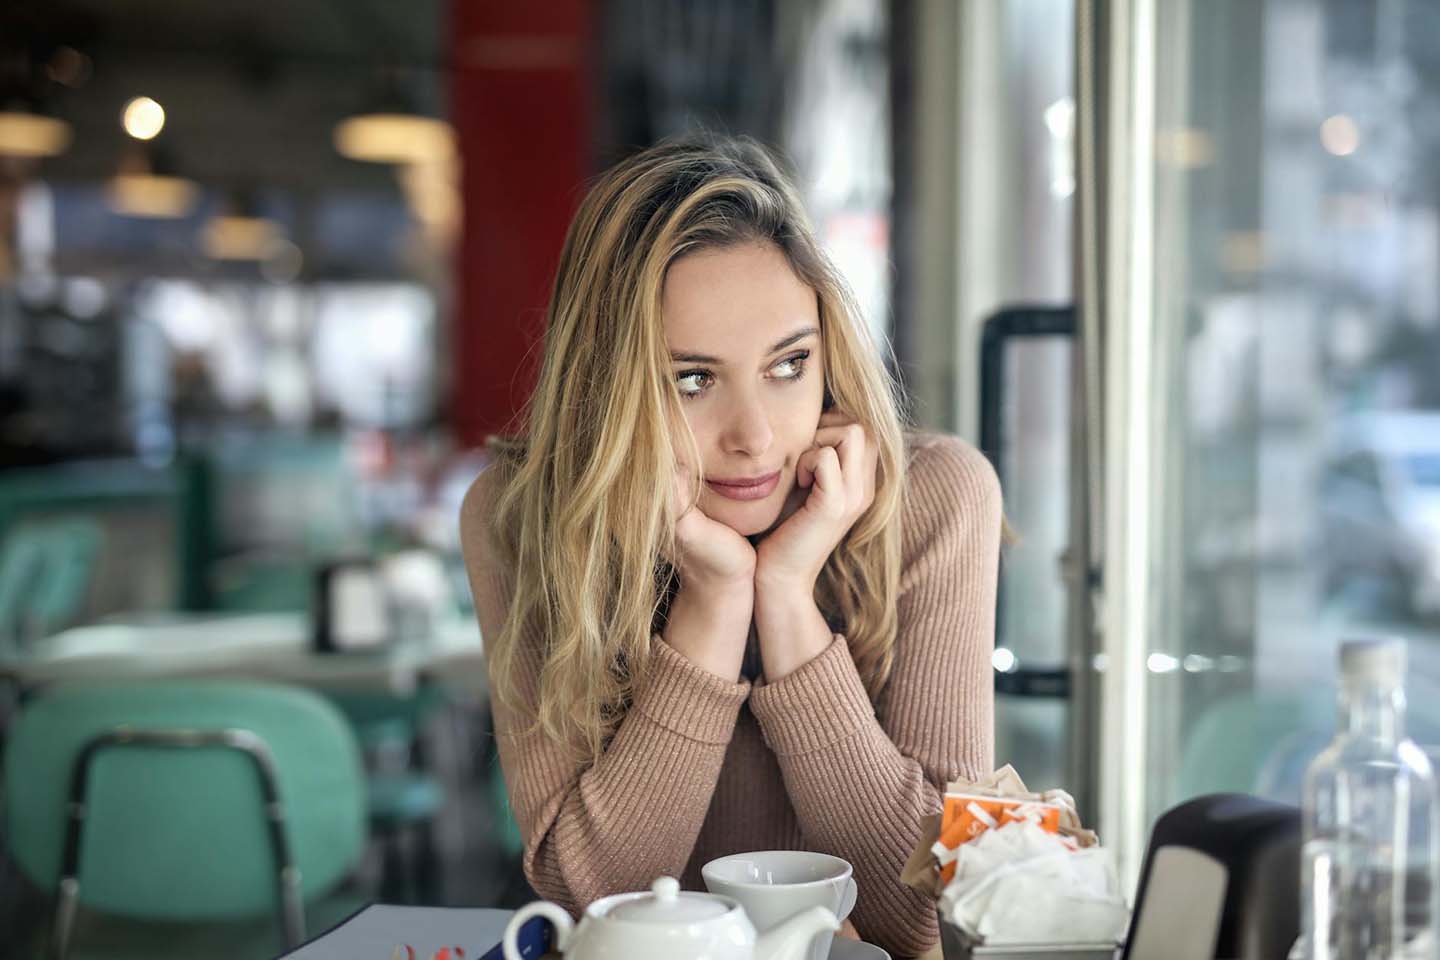 A woman sitting in a cafe and looking outside